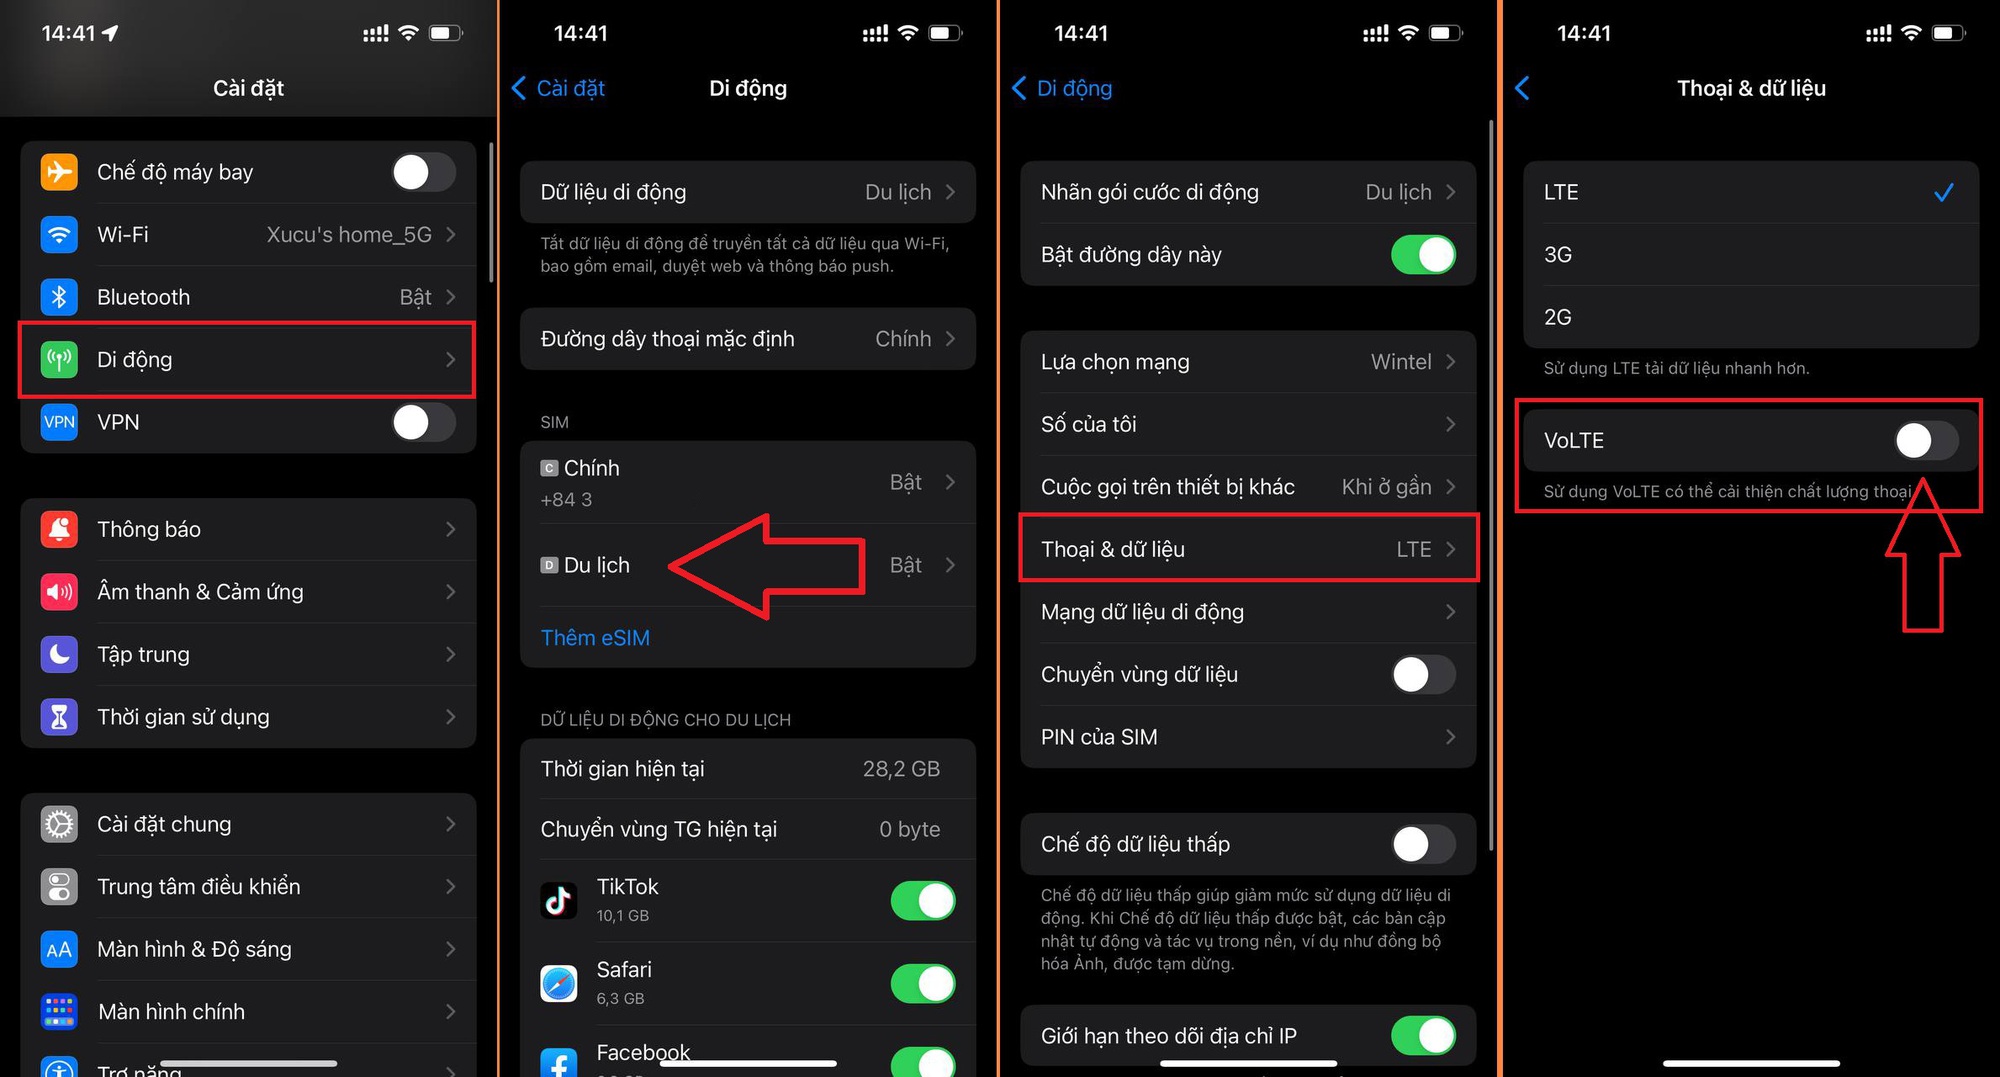 iPhone can't call with Messenger when on 4G/LTE, here's how to fix it - Photo 2.